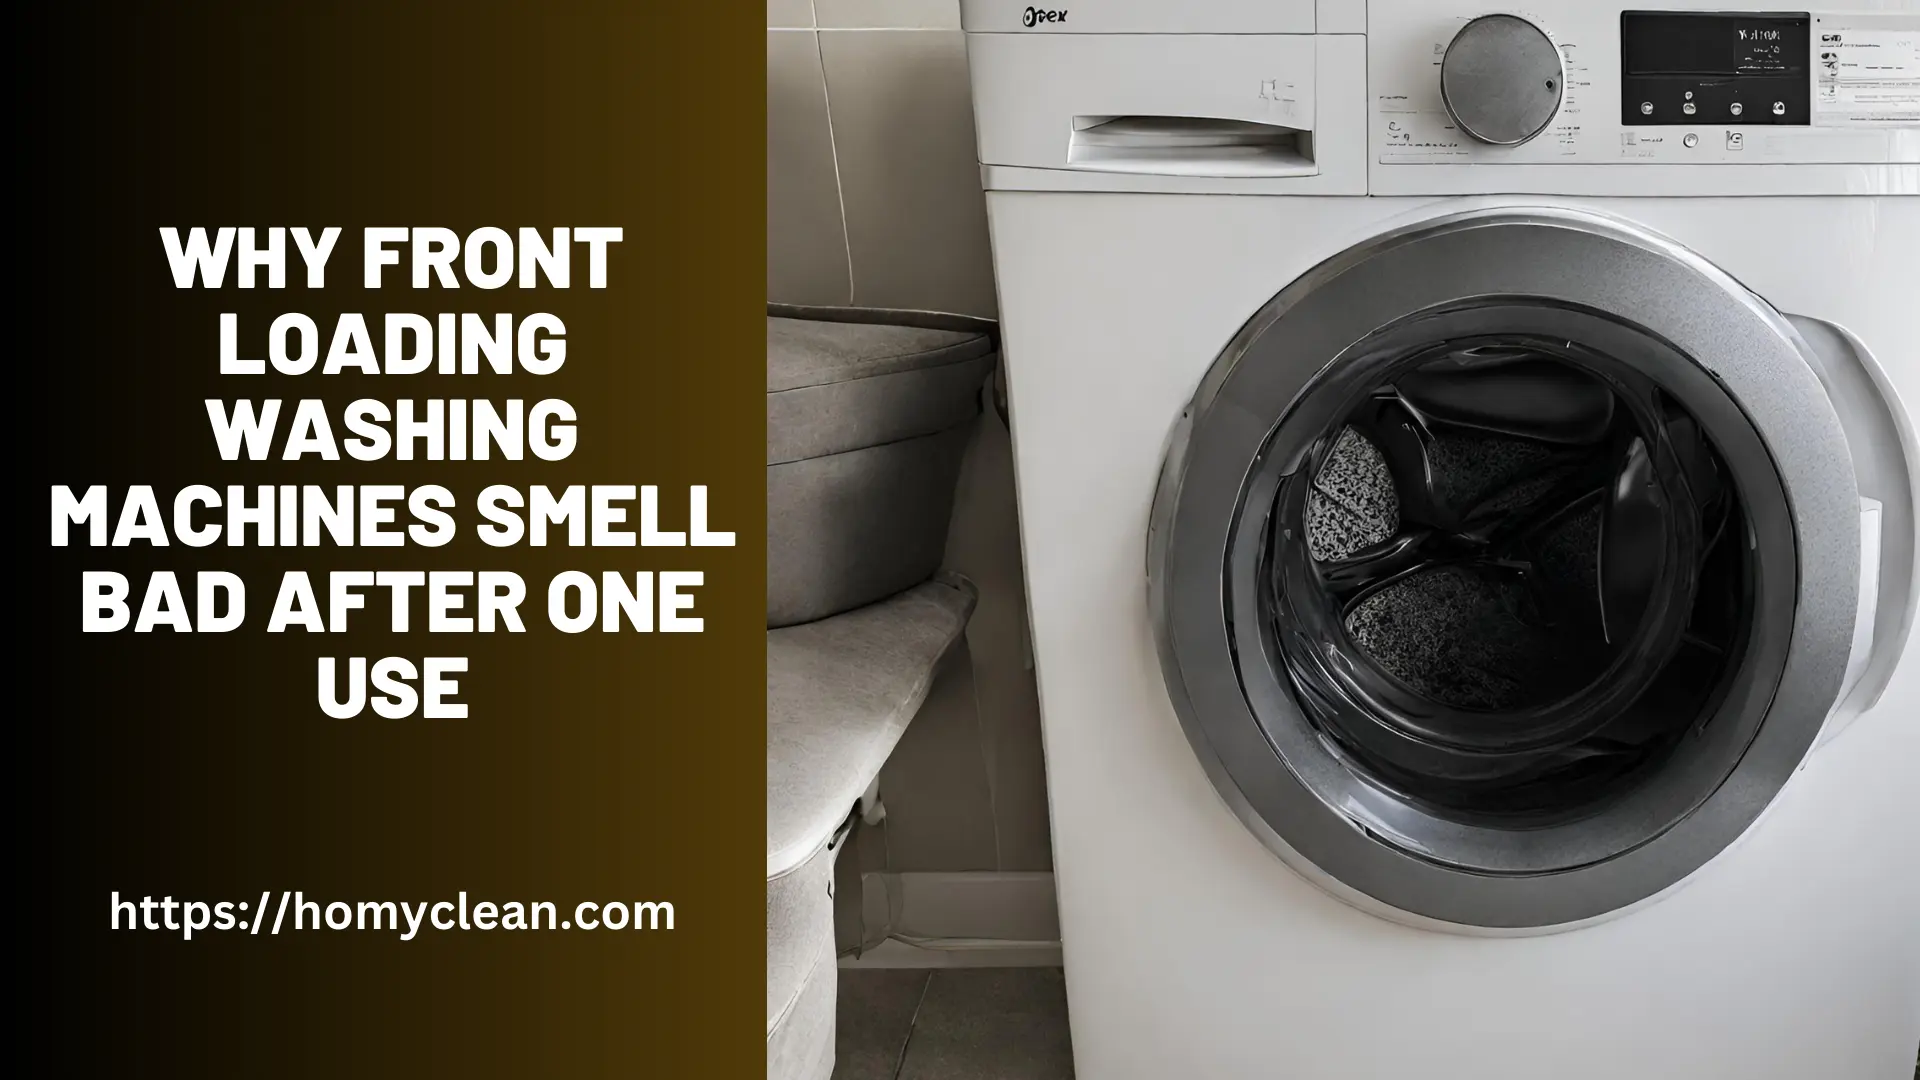 Why Front Loading Washing Machines Smell Bad After One Use